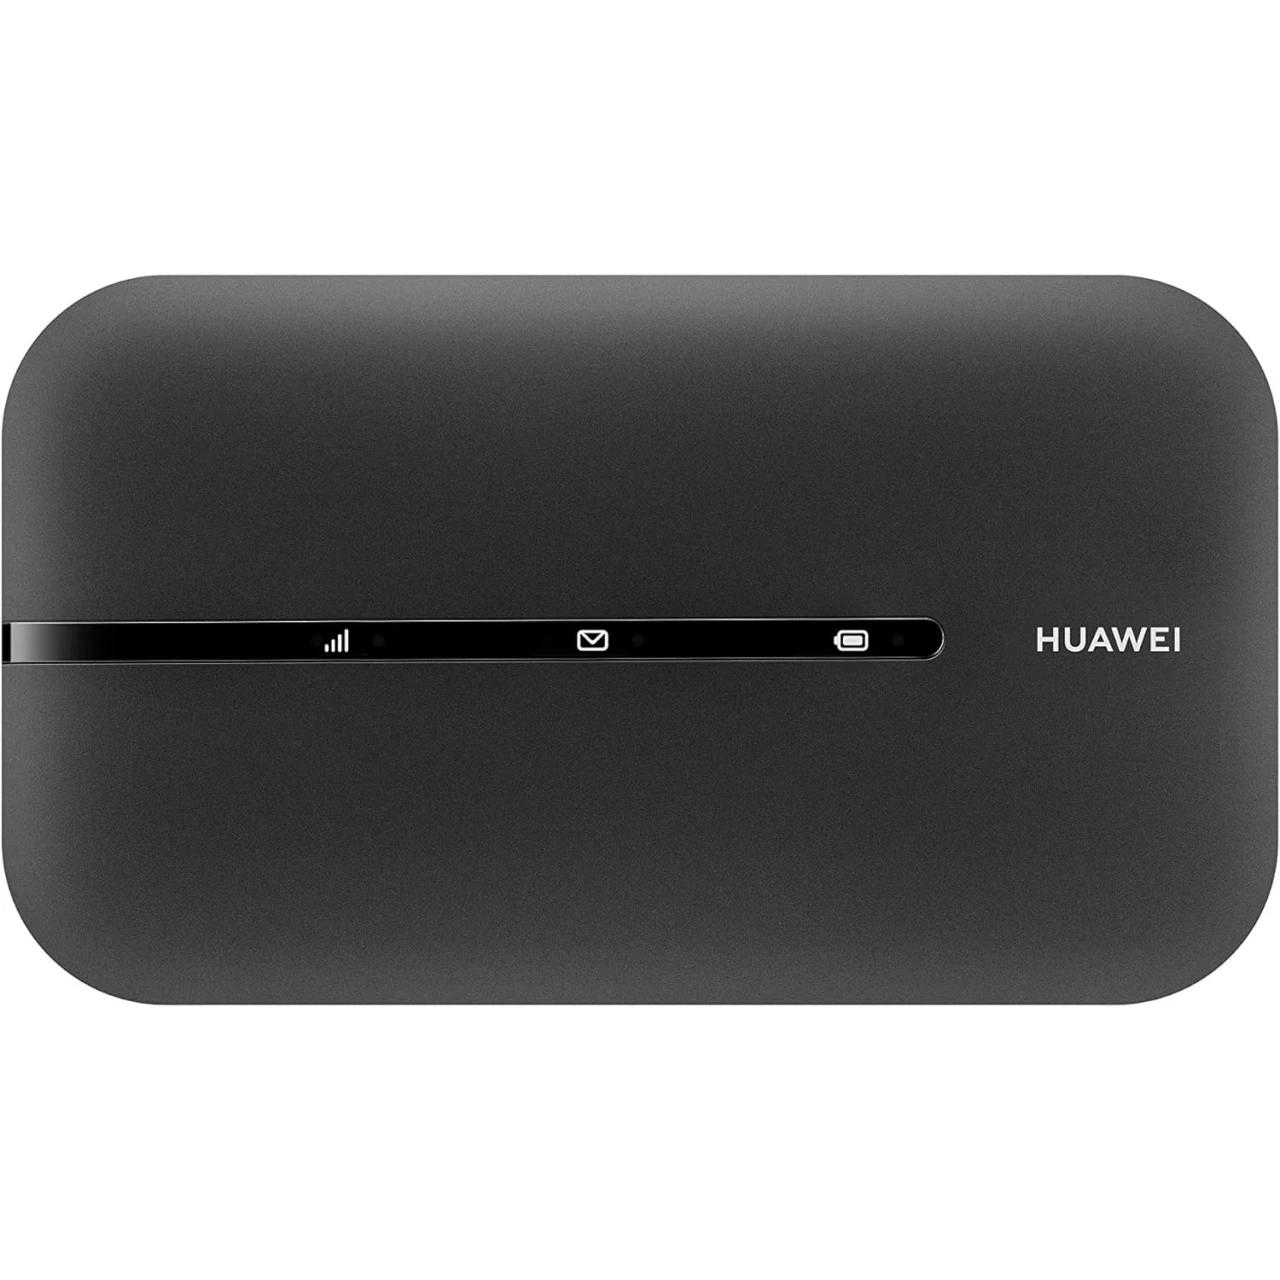 Huawei E5783B-230 Unlocked 300 Mbps 4G LTE Mobile WiFi Hot Spot (4G LTE in Europe, Asia, Middle East, Africa) Black